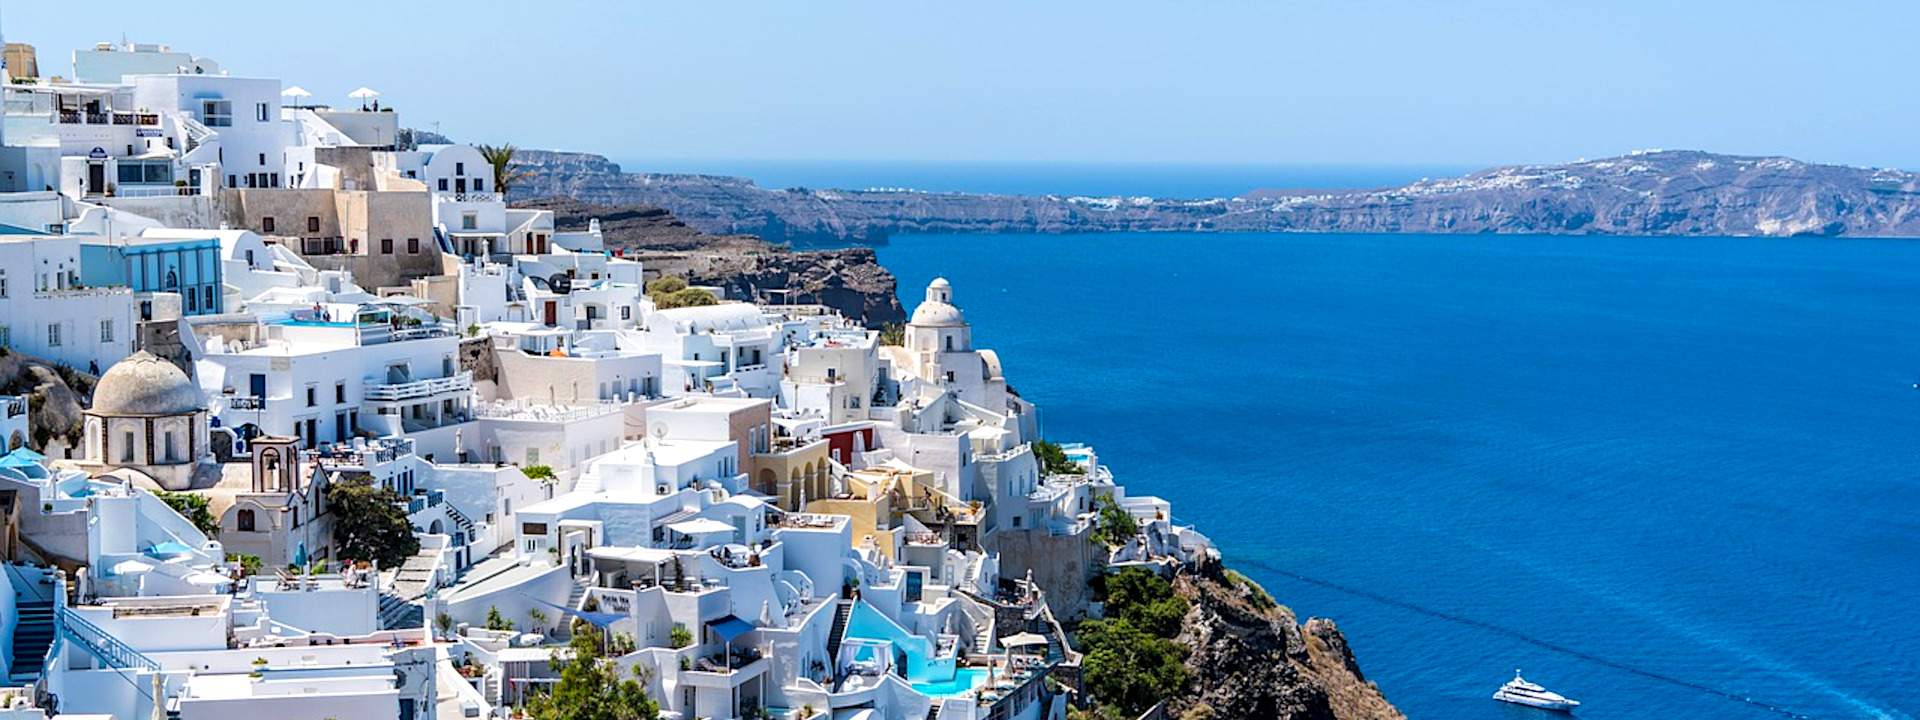 Discover the most beautiful Greek islands aboard a luxury yacht